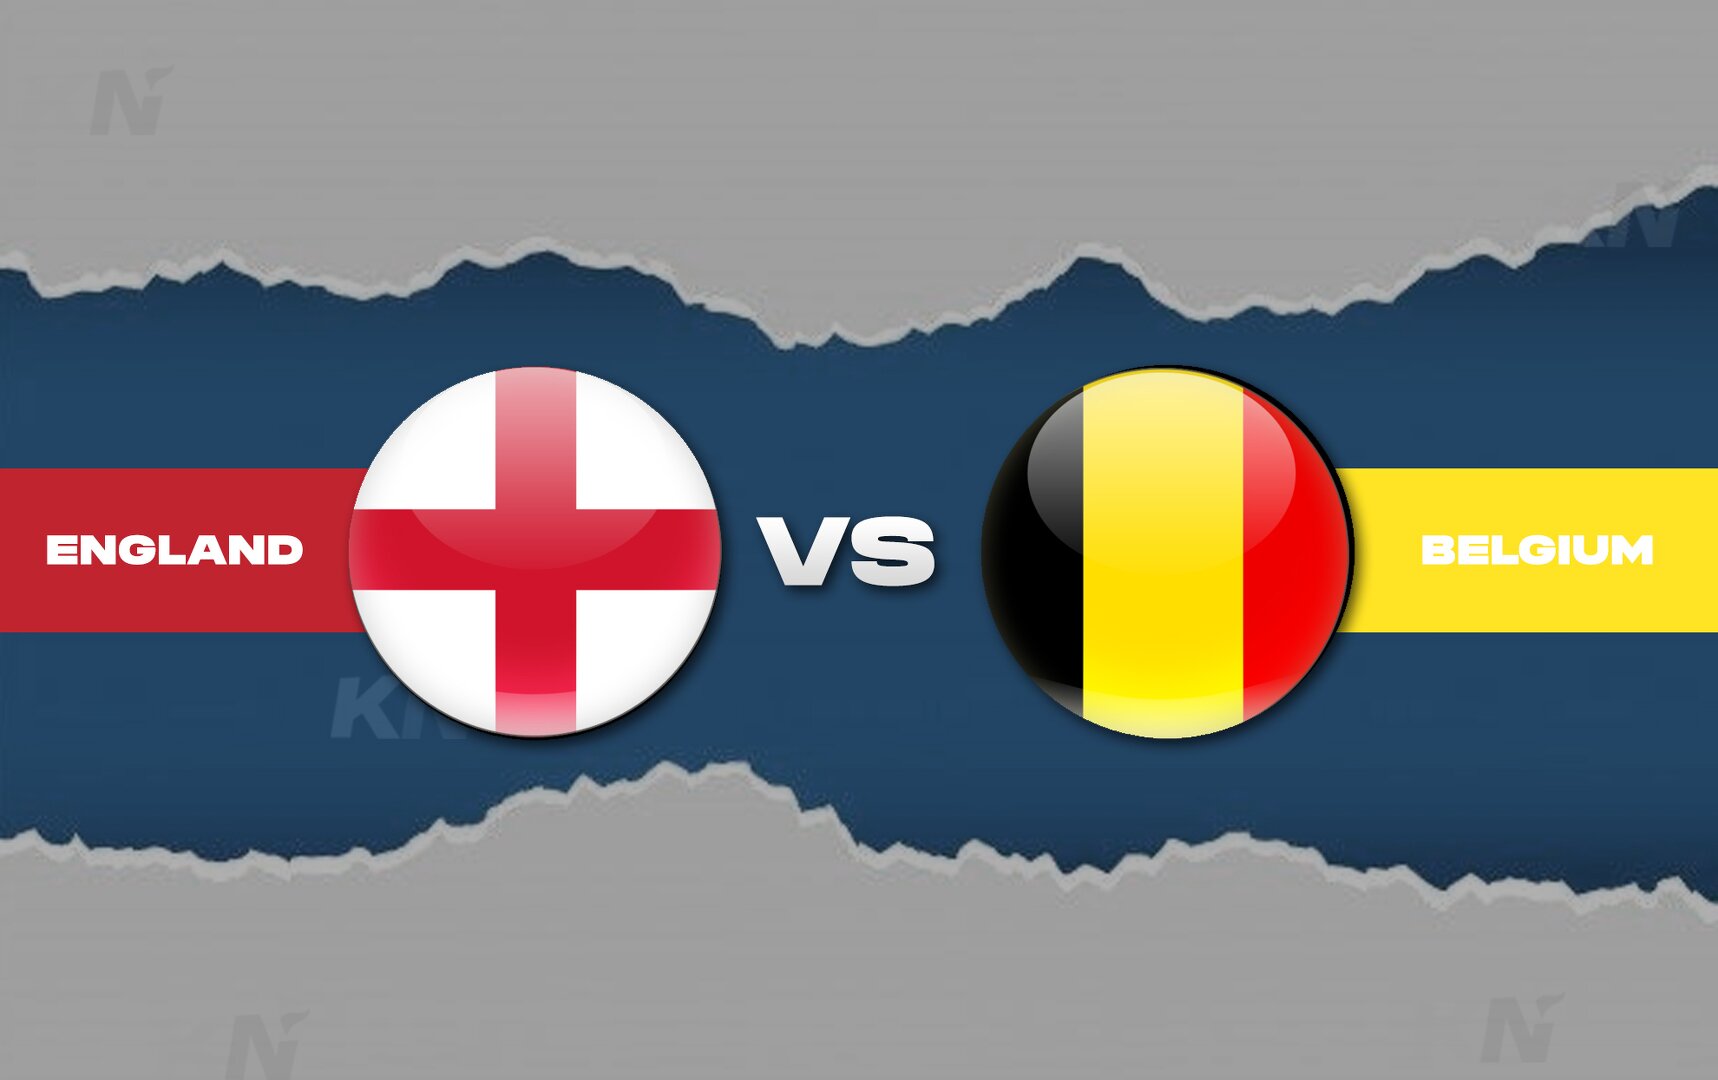 England vs Belgium Live streaming, TV channel, kickoff time & where